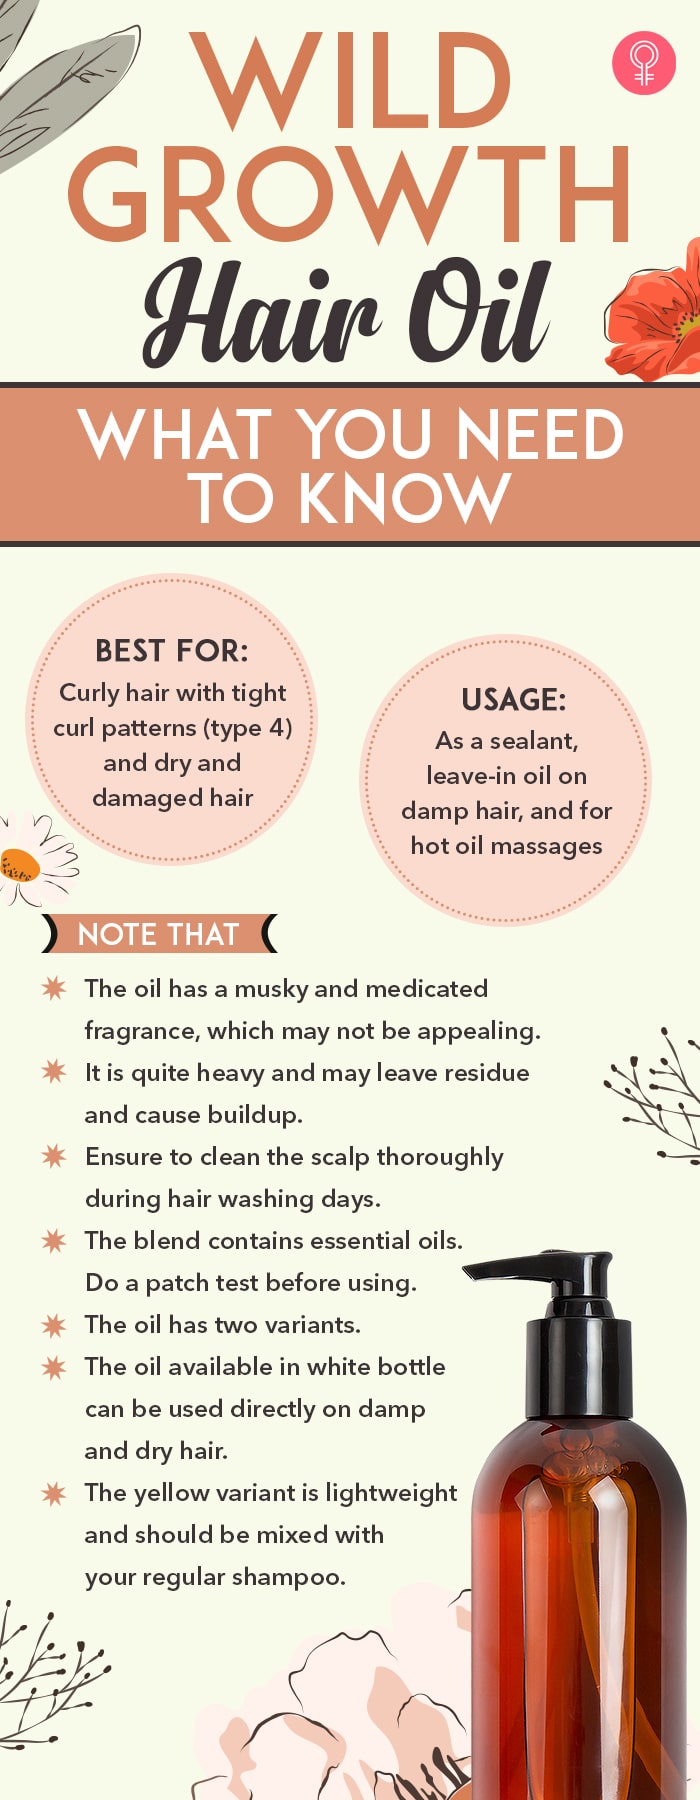 wild growth hair oil (infographic)